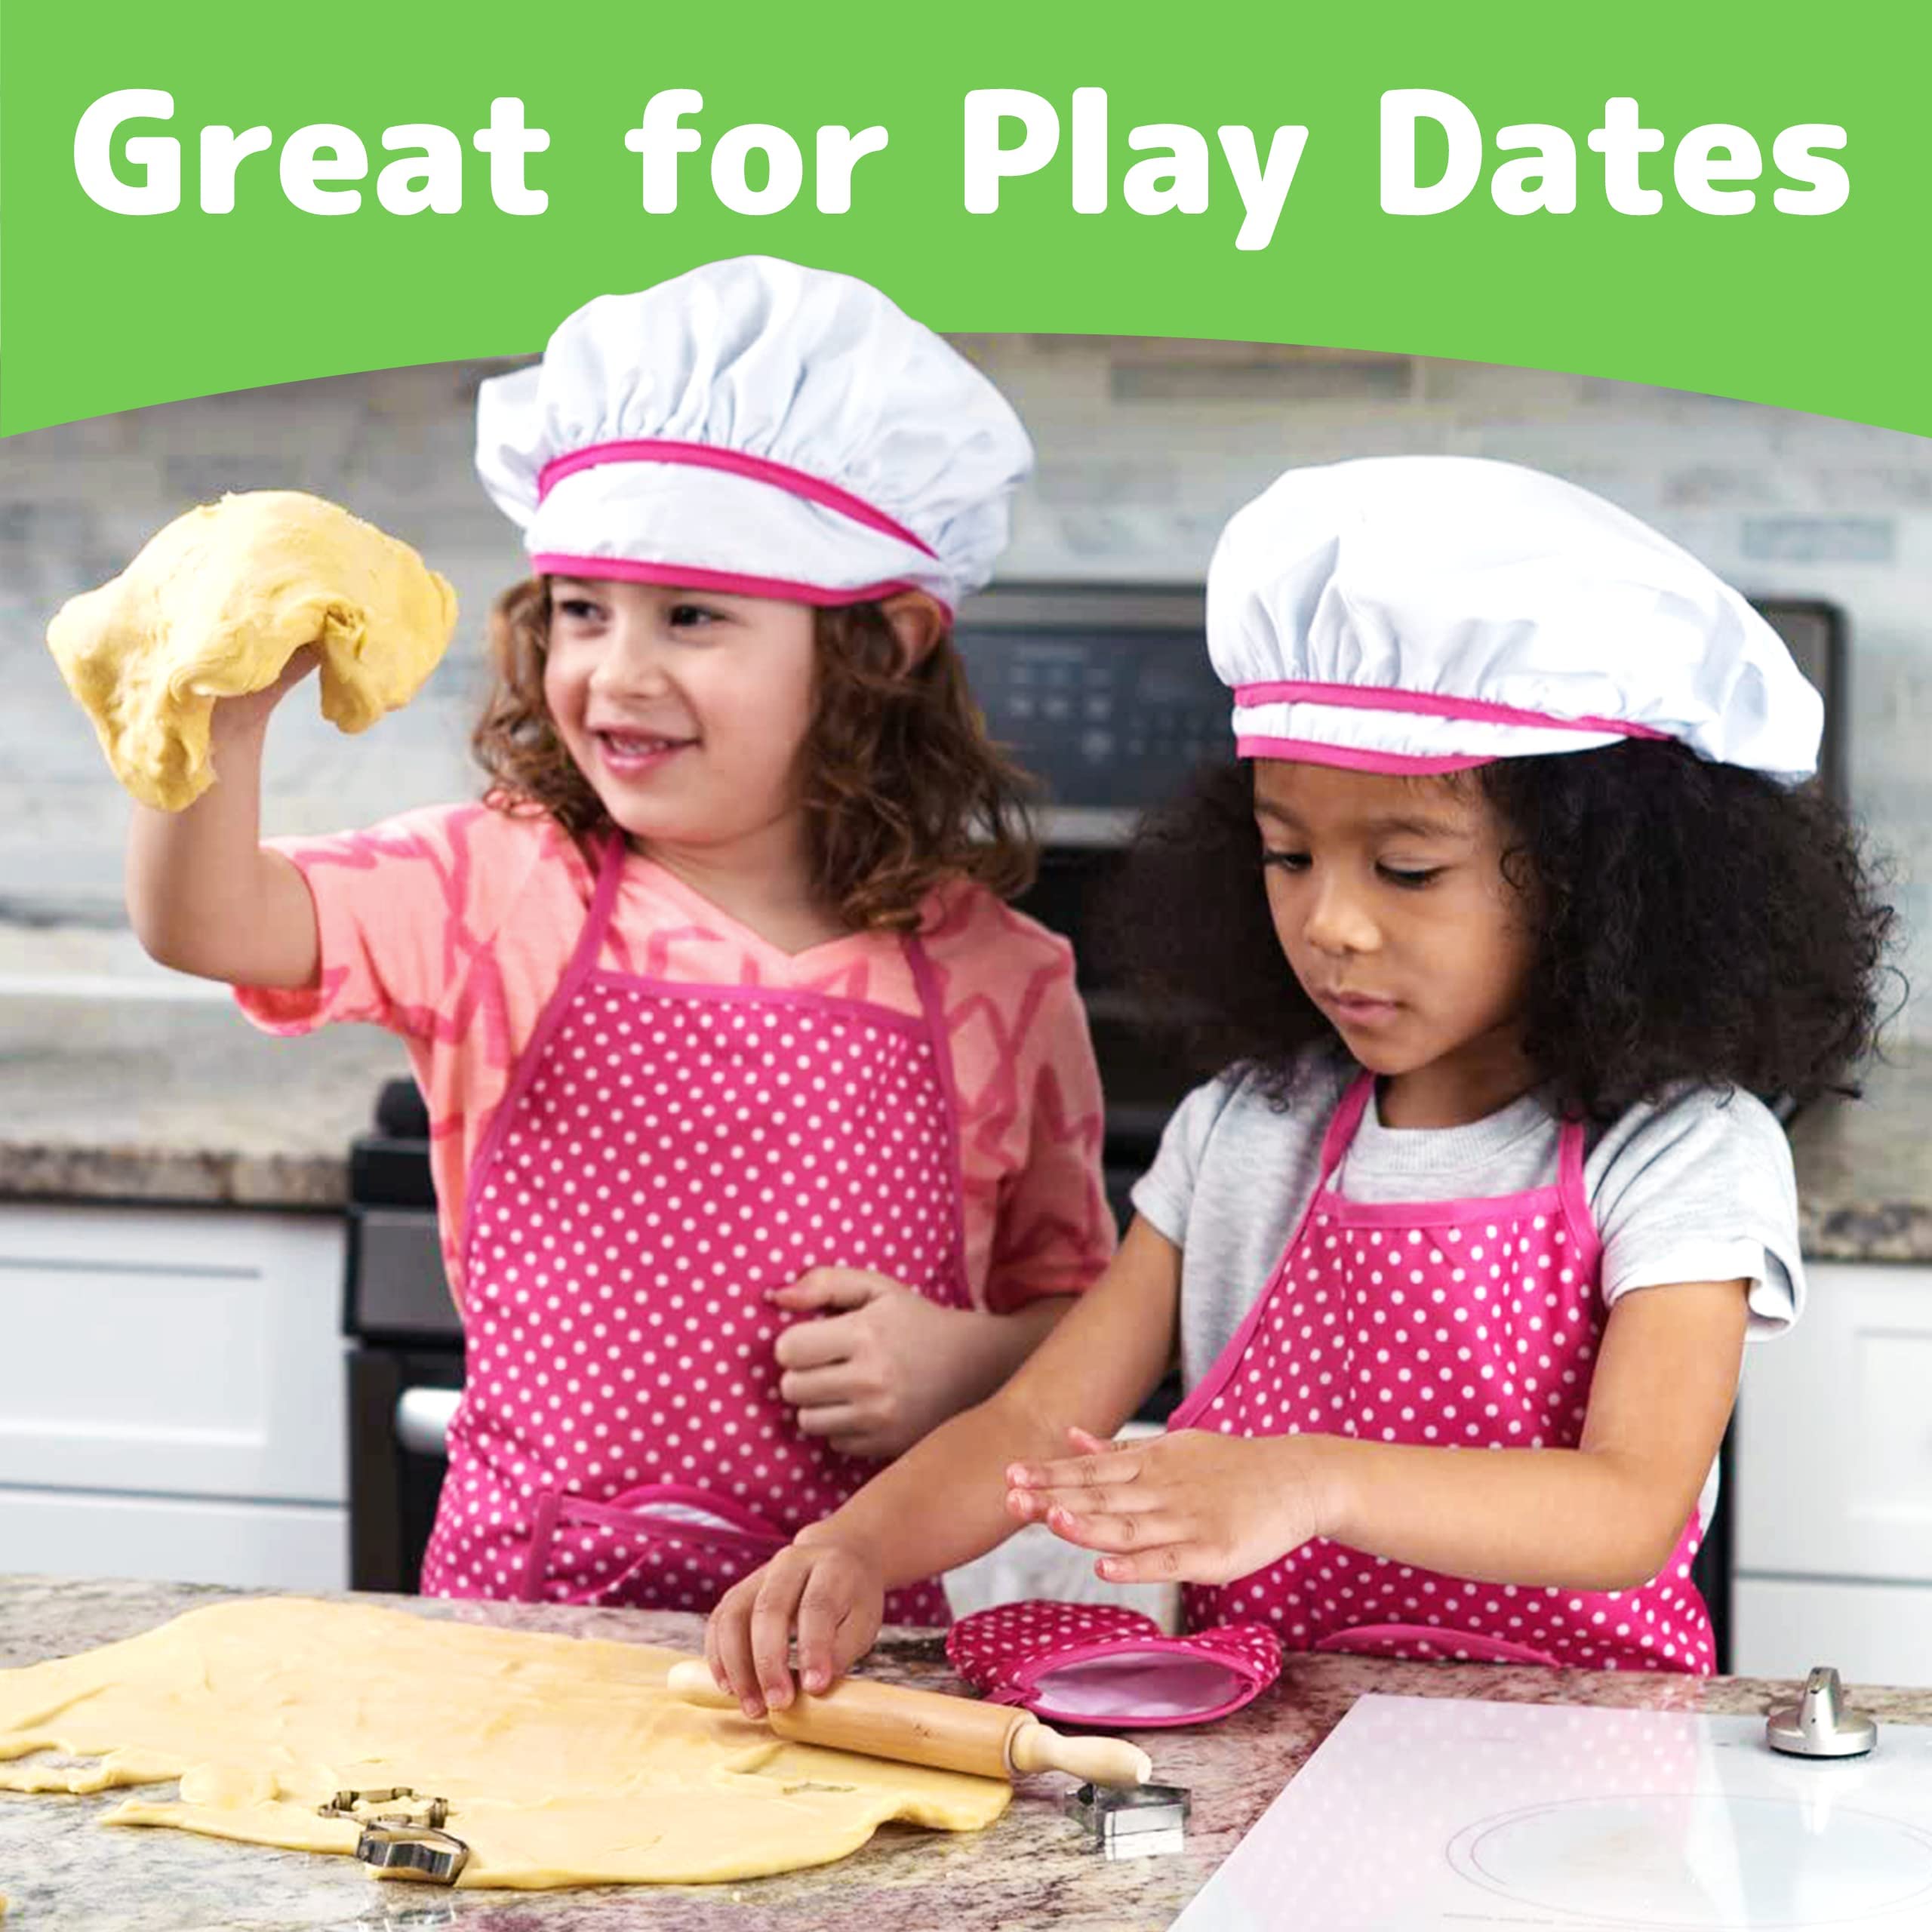 Kids Cooking and Baking Chef Set for Little Girls, Complete Cooking Sets, Toddler Dress Up & Pretend Play Costume Clothes, Kit w/ Pink Kid Chef Apron & Accessories, Kids Kitchen Toys 3-5 Years Old